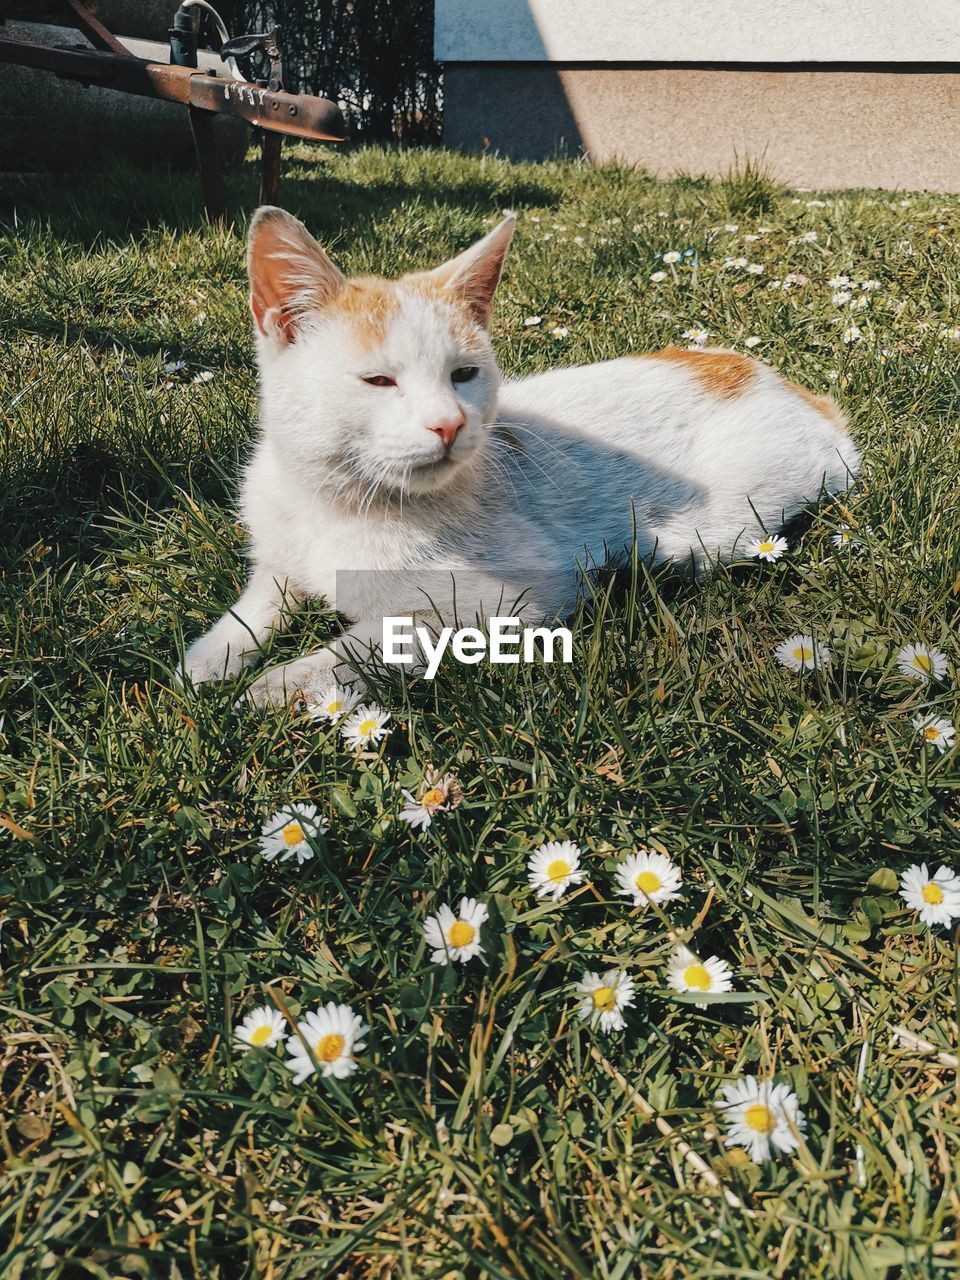 pet, animal themes, animal, mammal, domestic animals, cat, one animal, domestic cat, plant, feline, grass, flower, flowering plant, nature, no people, day, small to medium-sized cats, white, felidae, field, high angle view, relaxation, kitten, outdoors, whiskers, growth, portrait, looking at camera, sunlight